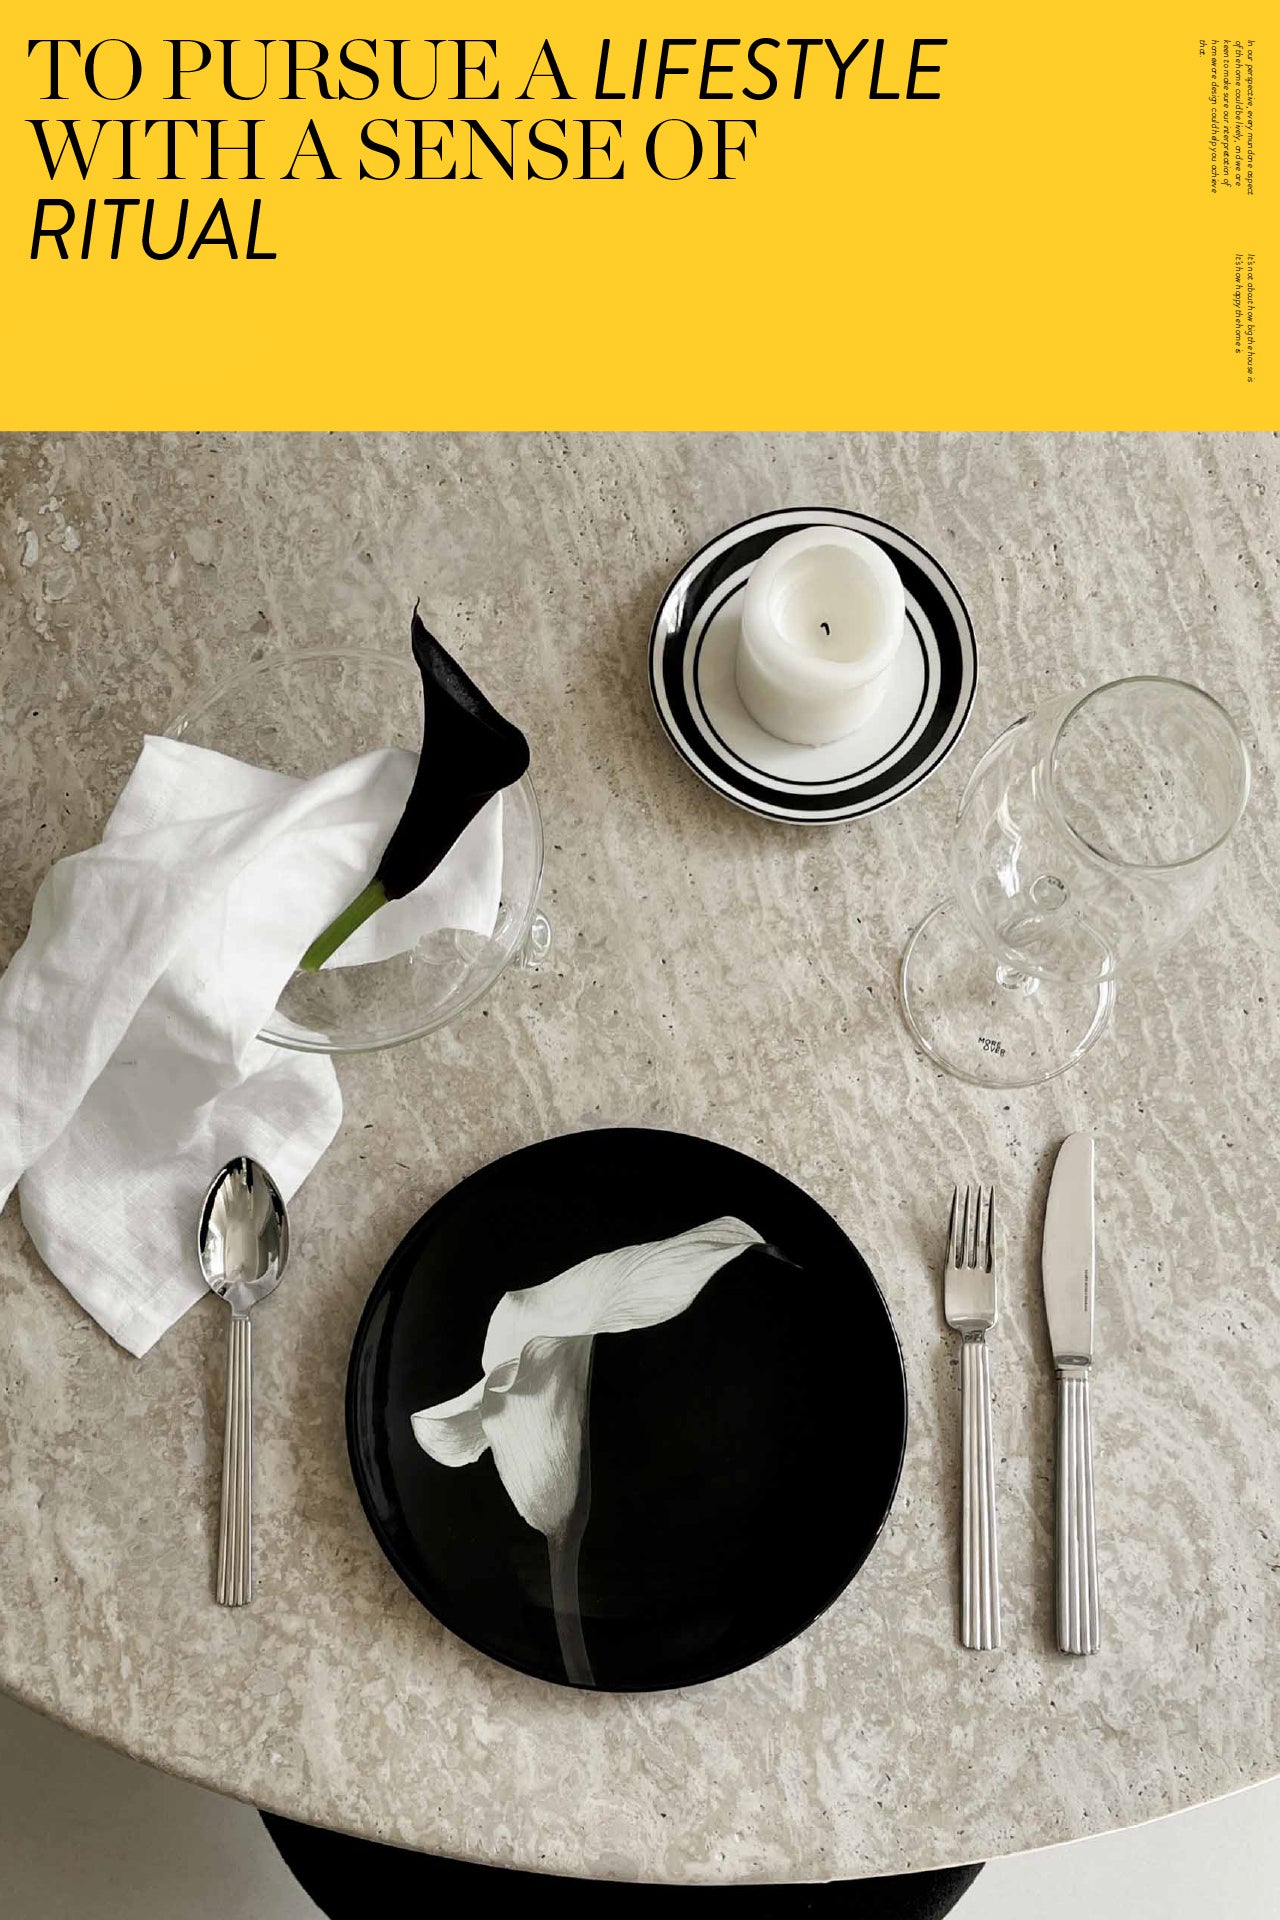 Calla lily patterned black ceramic plate for breakfast and dinner tableware, by A Bit Sleep homedeocor concept store